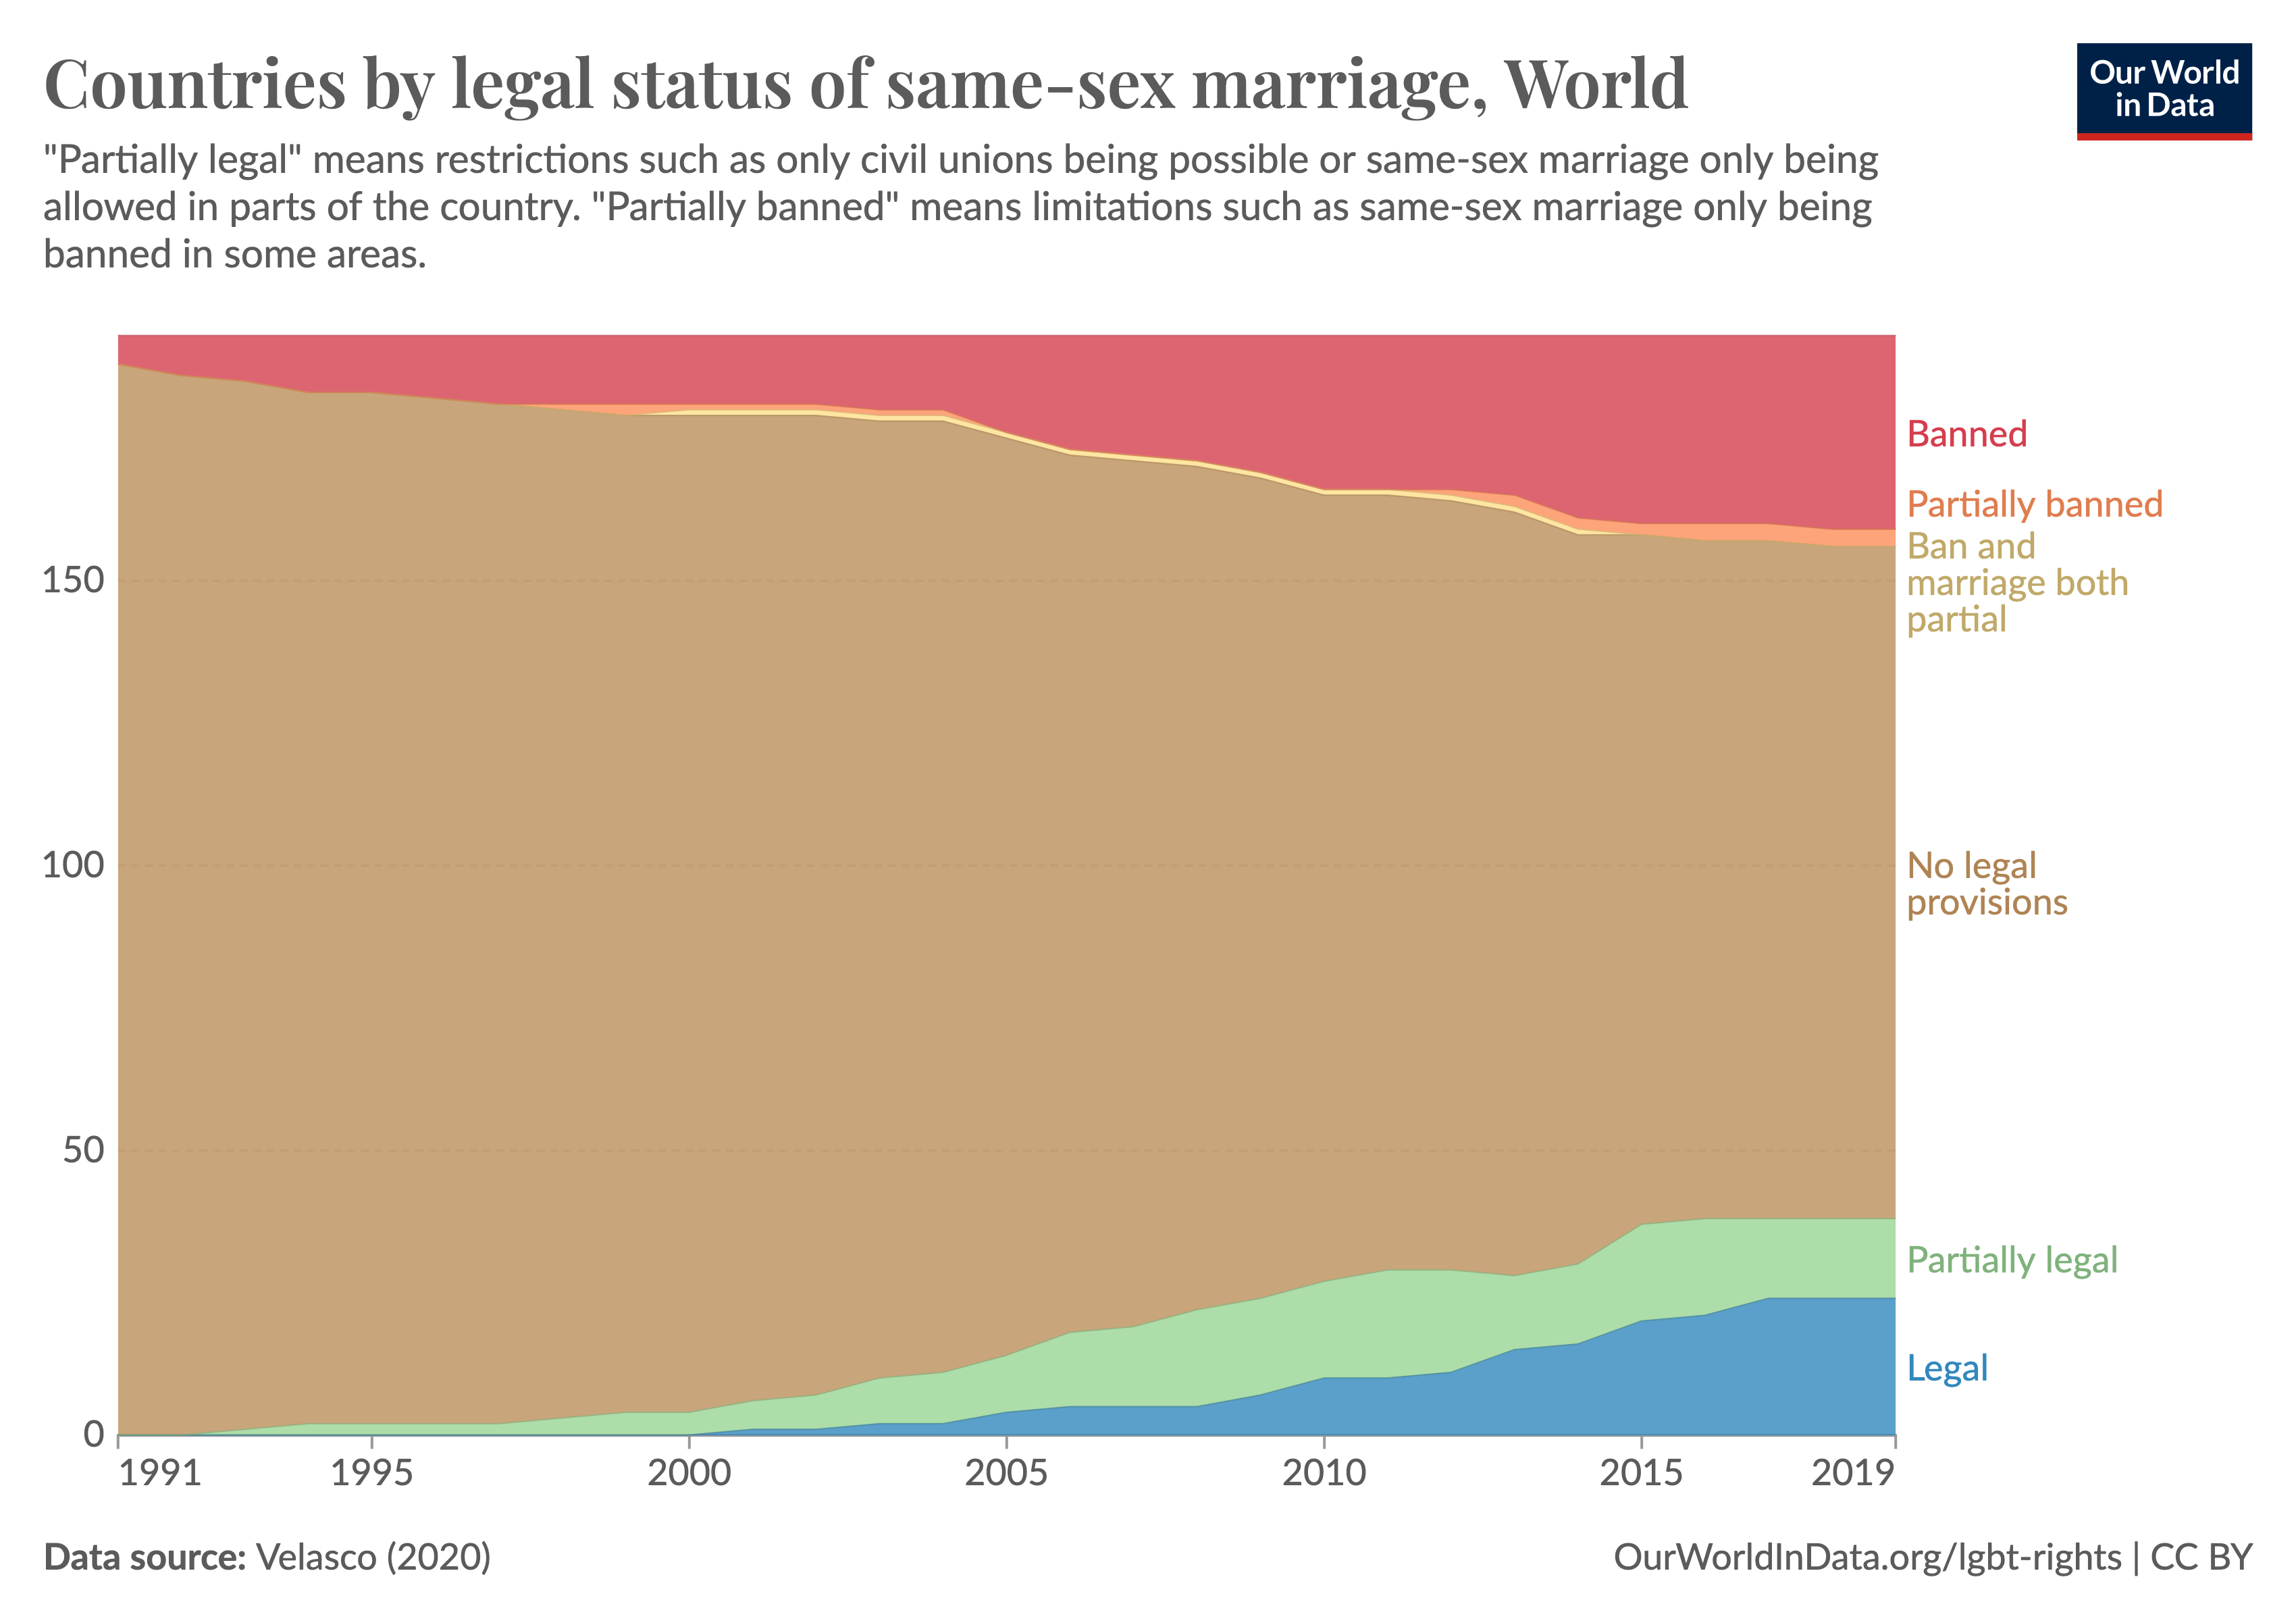 Stacked area chart showing that the number of countries that partially or fully ban marriage for same-sex partners has increased to more than 30 in recent decades, while the number of countries that have partially or fully legalized it has similarly increased.